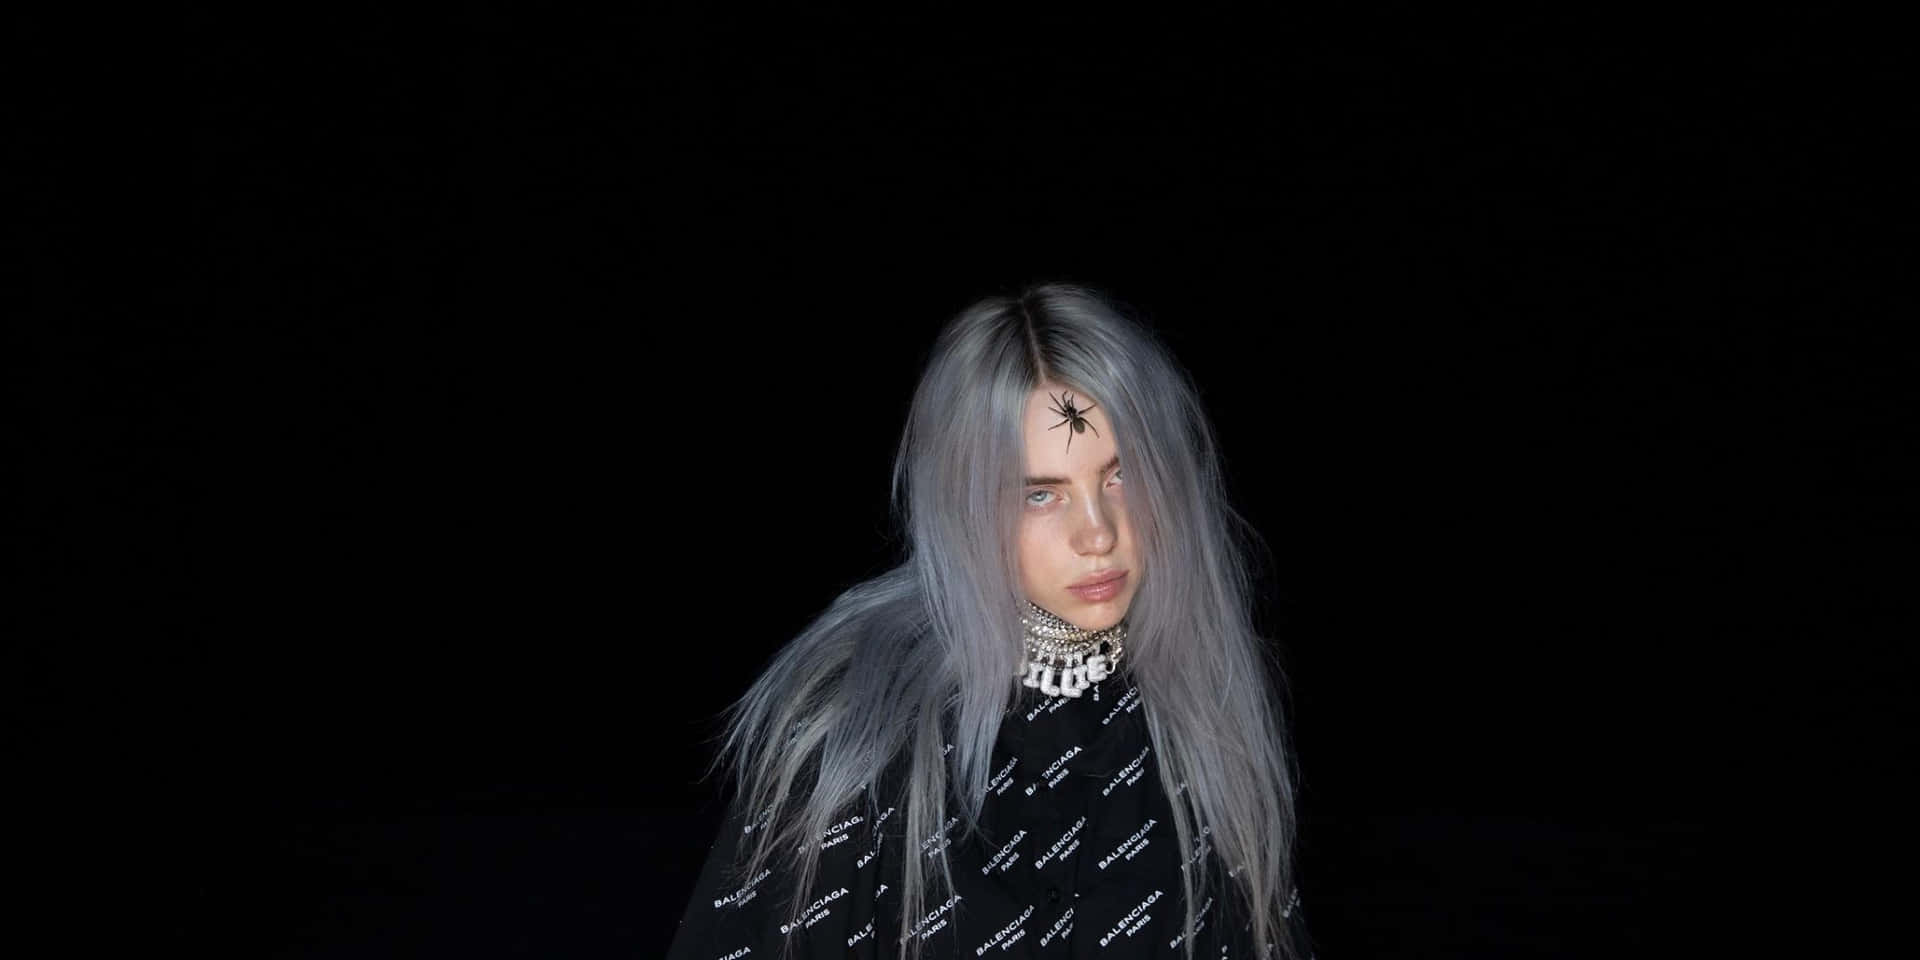 Billie Eilish shows us her spirit, her laptop and her style Wallpaper